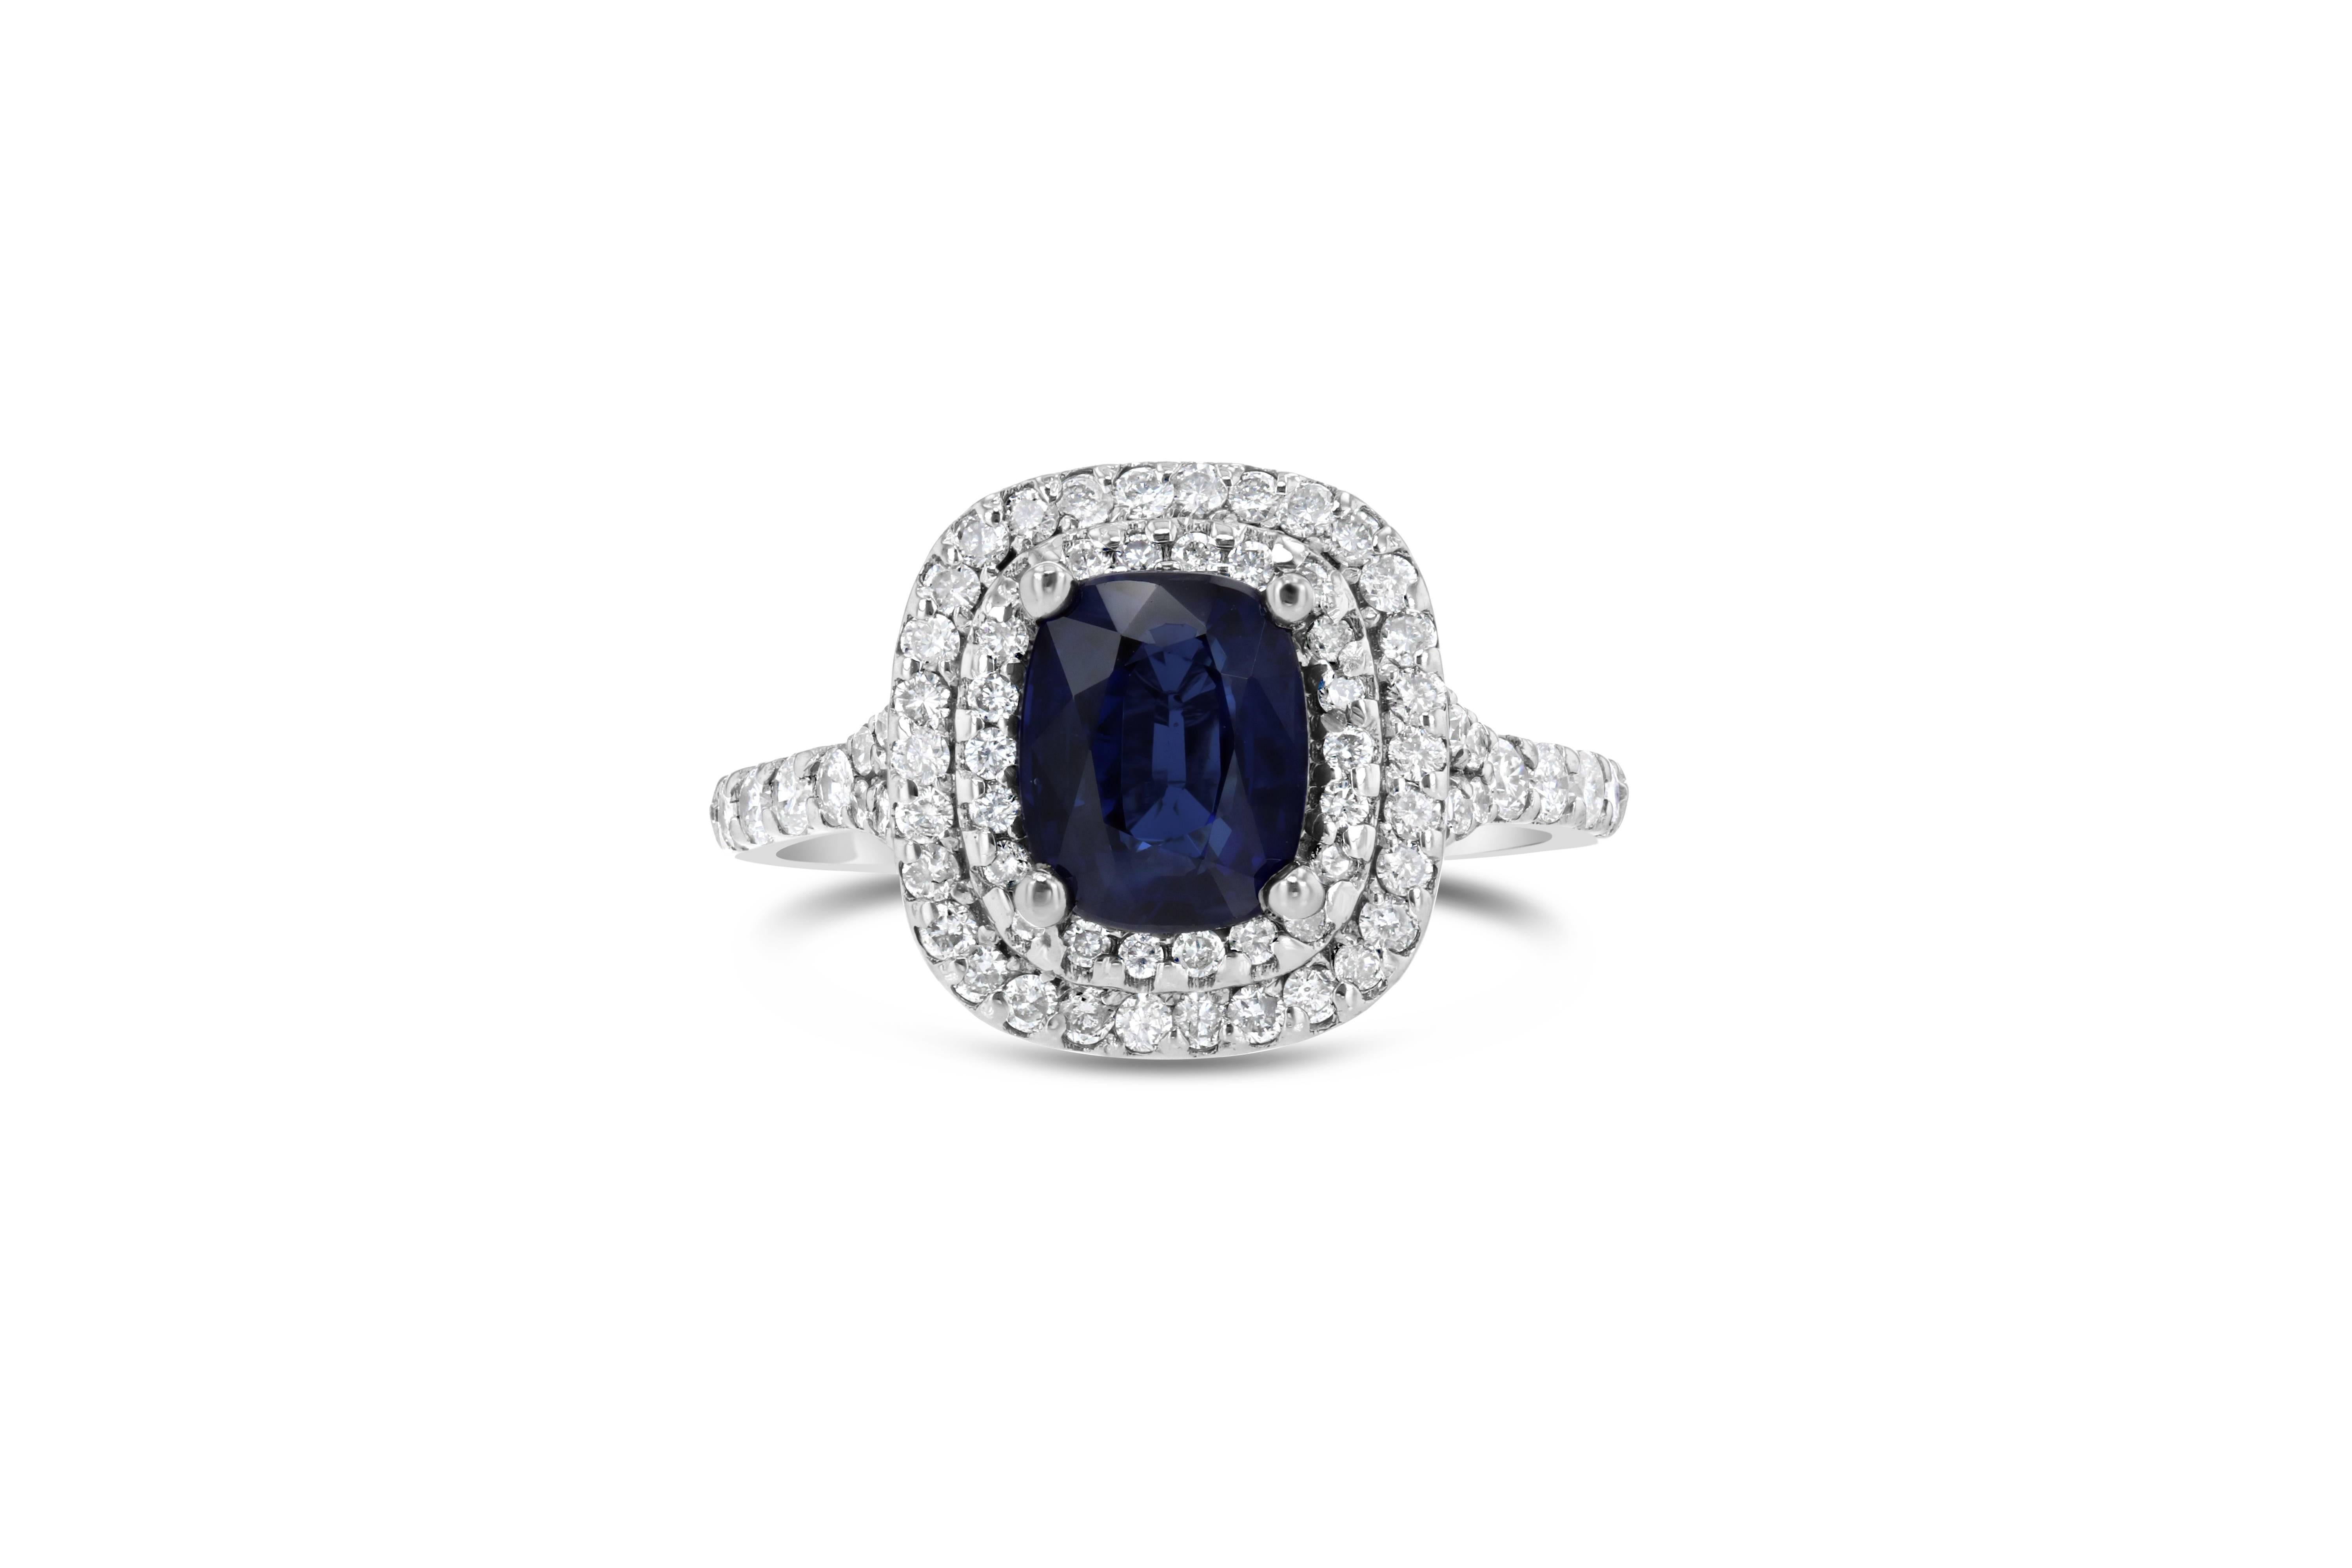 Gorgeous double halo Sapphire and Diamond ring that can easily be worn as a unique Engagement ring!  The deep blue Sapphire weighs 2.01 carat and is surrounded by 75 Round Cut Diamonds that weigh 0.65 carats.  The clarity ranges from SI1-SI2 and